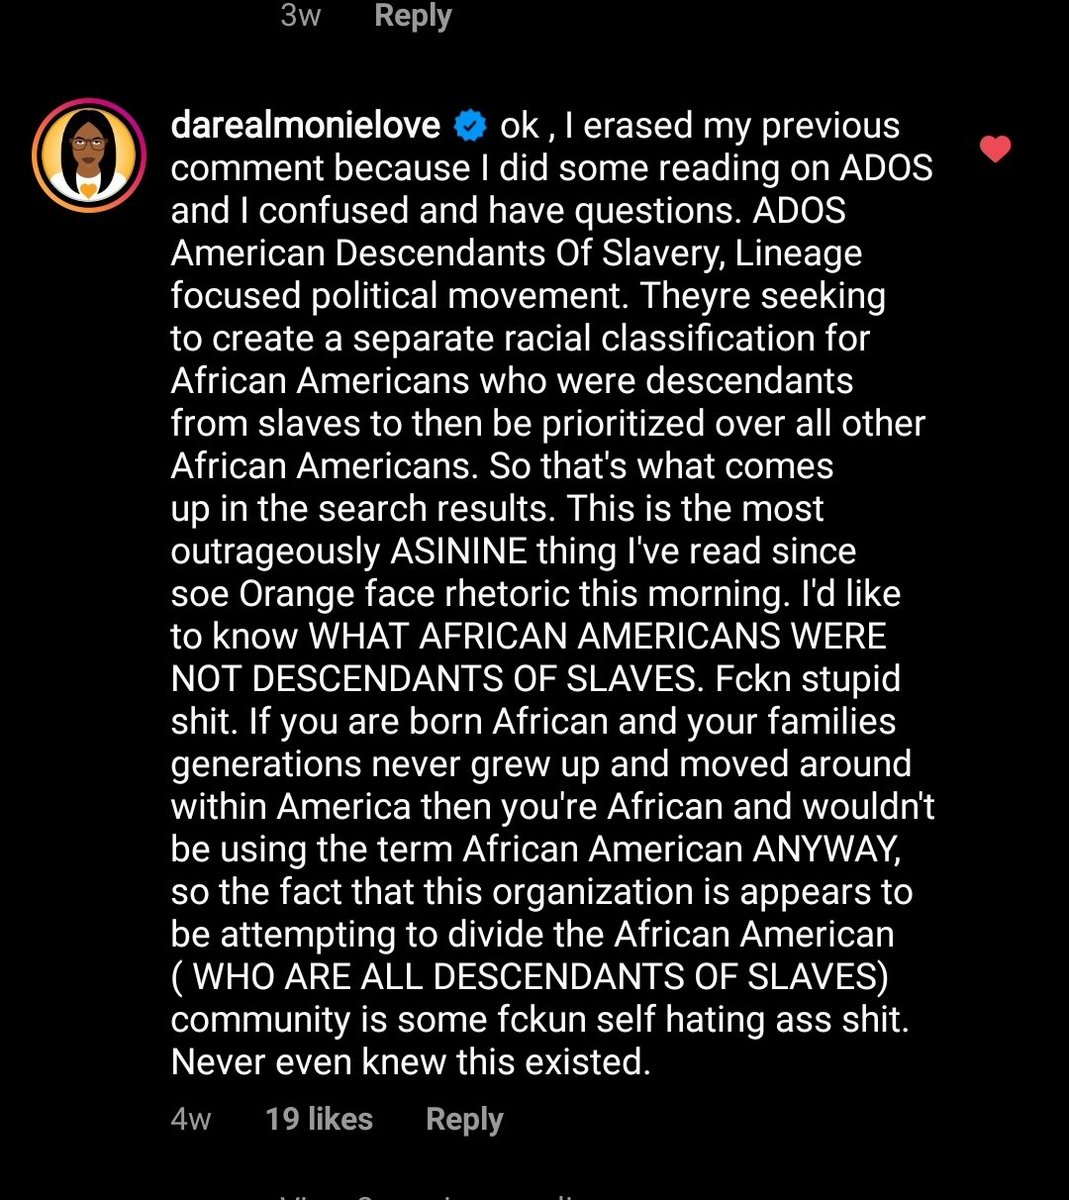 Talib Kweli recently shifted his anti-Yvette Carnell and anti-ADOS campaign to Instagram with the same propaganda & talking points. He smeared another woman, George Senate candidate, Tamara Shealey, for identifying as  #ADOS. He targets any affiliation with Yvette Carnell.